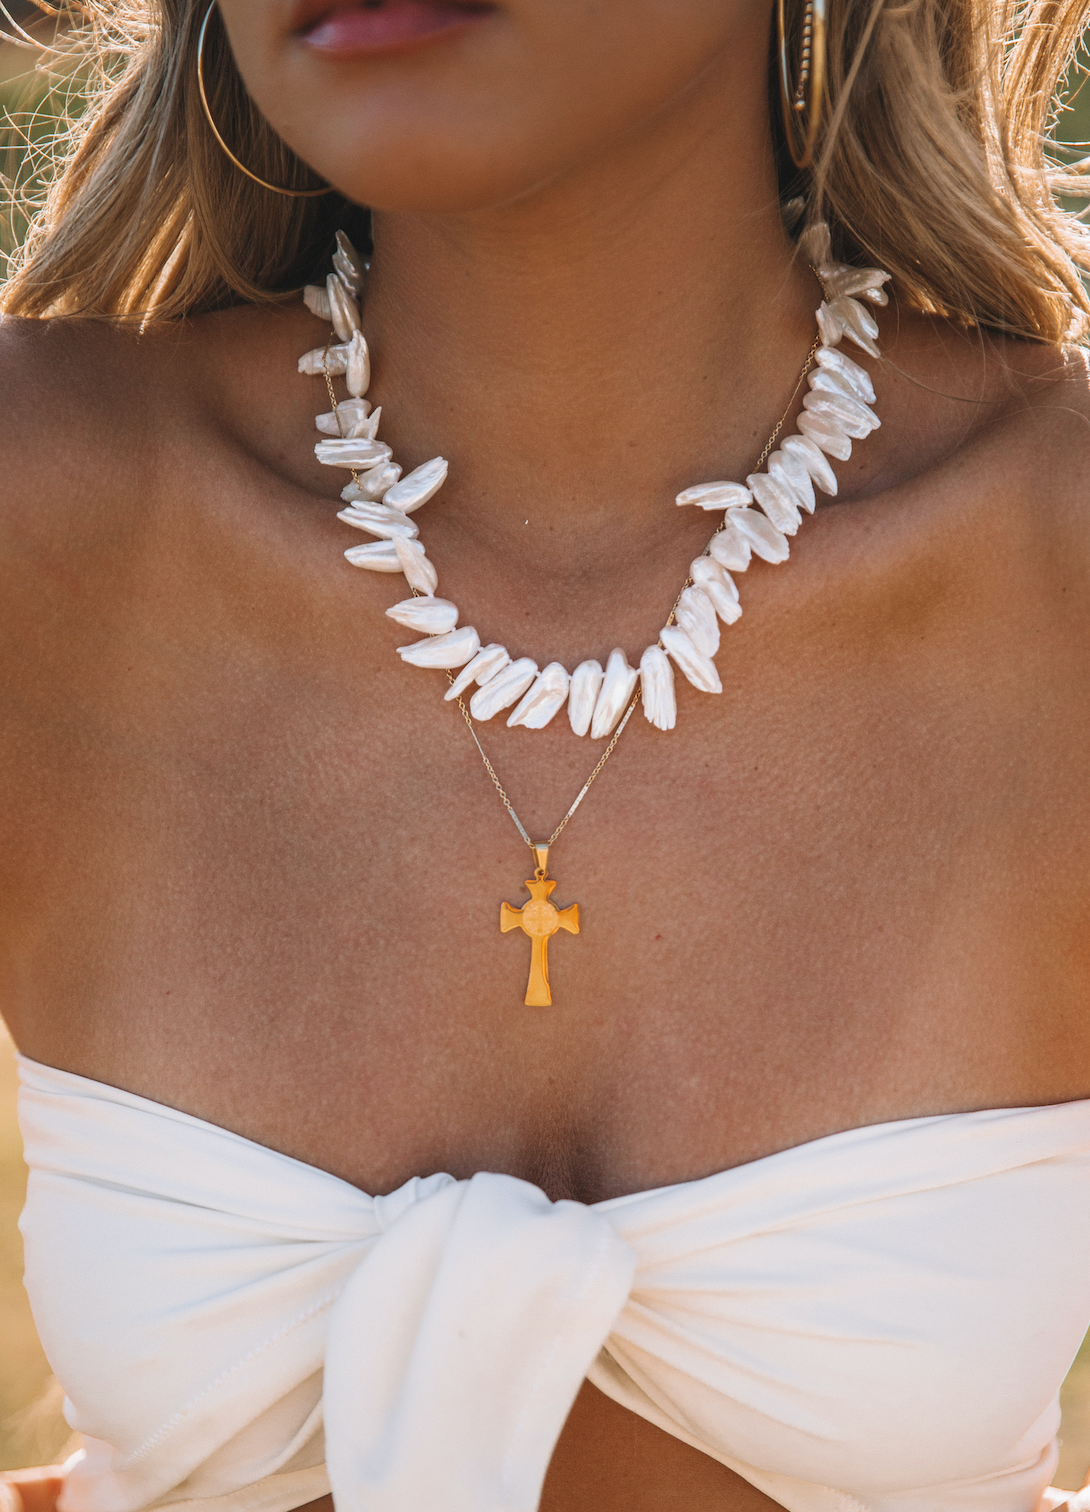 The Dainty St. Benedict Necklace